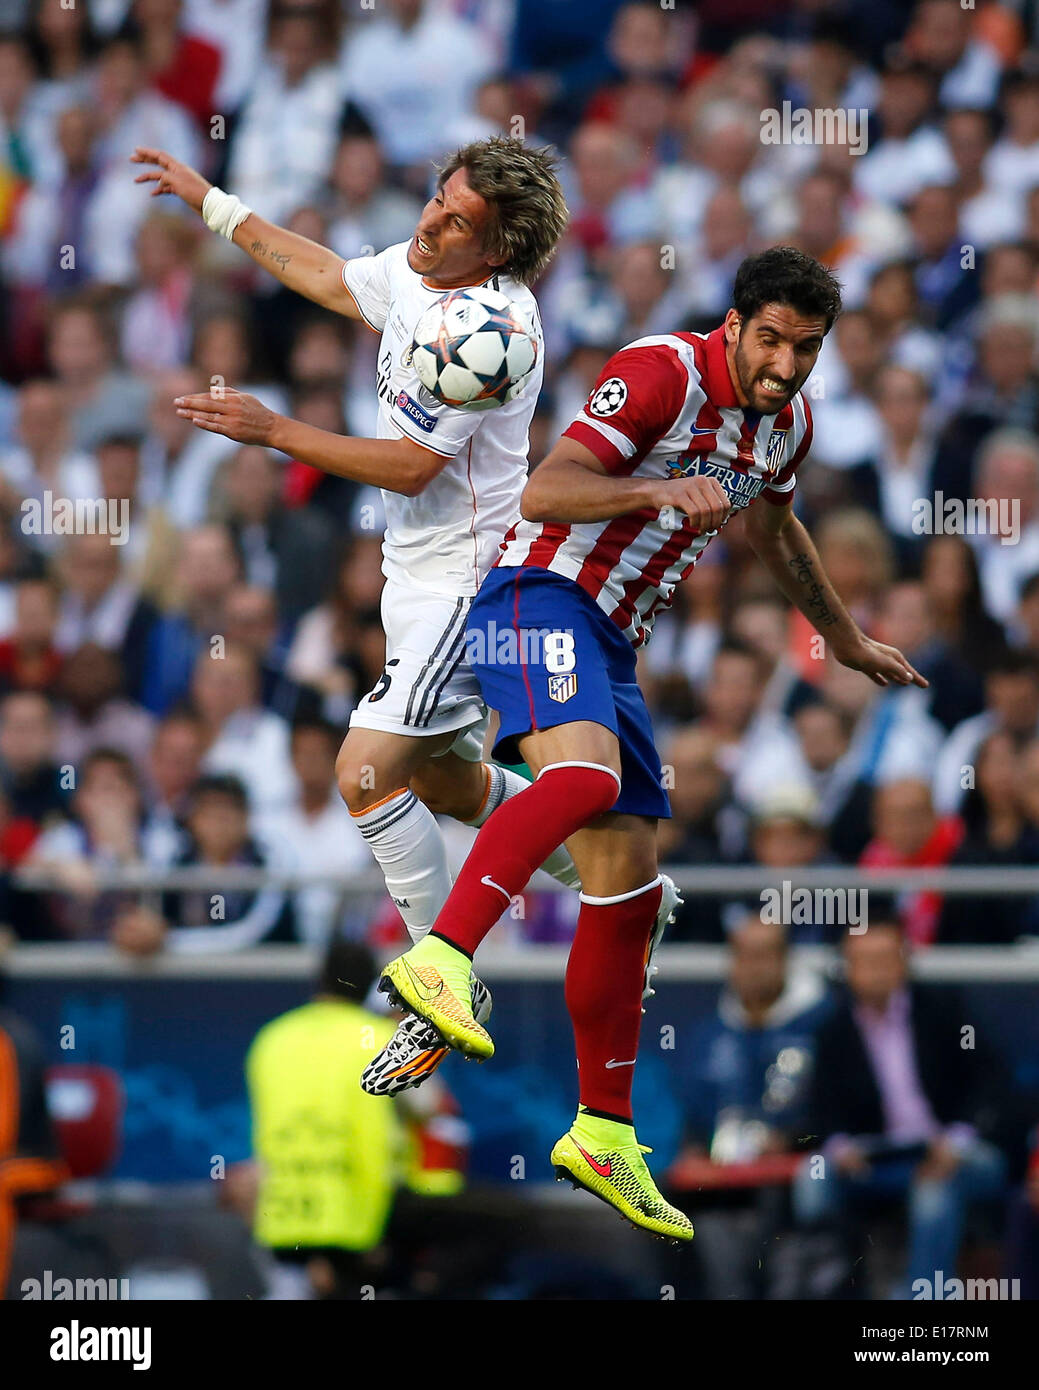 Fabio Coentrao (Real Madrid CF #5) going for a header against Raul Garcia (Atletico Madrid #8) during the final of the Champions league between Real Madrid and Atletico Madrid, Estadio da Luz in Lisbon on May 24., 2014. Stock Photo